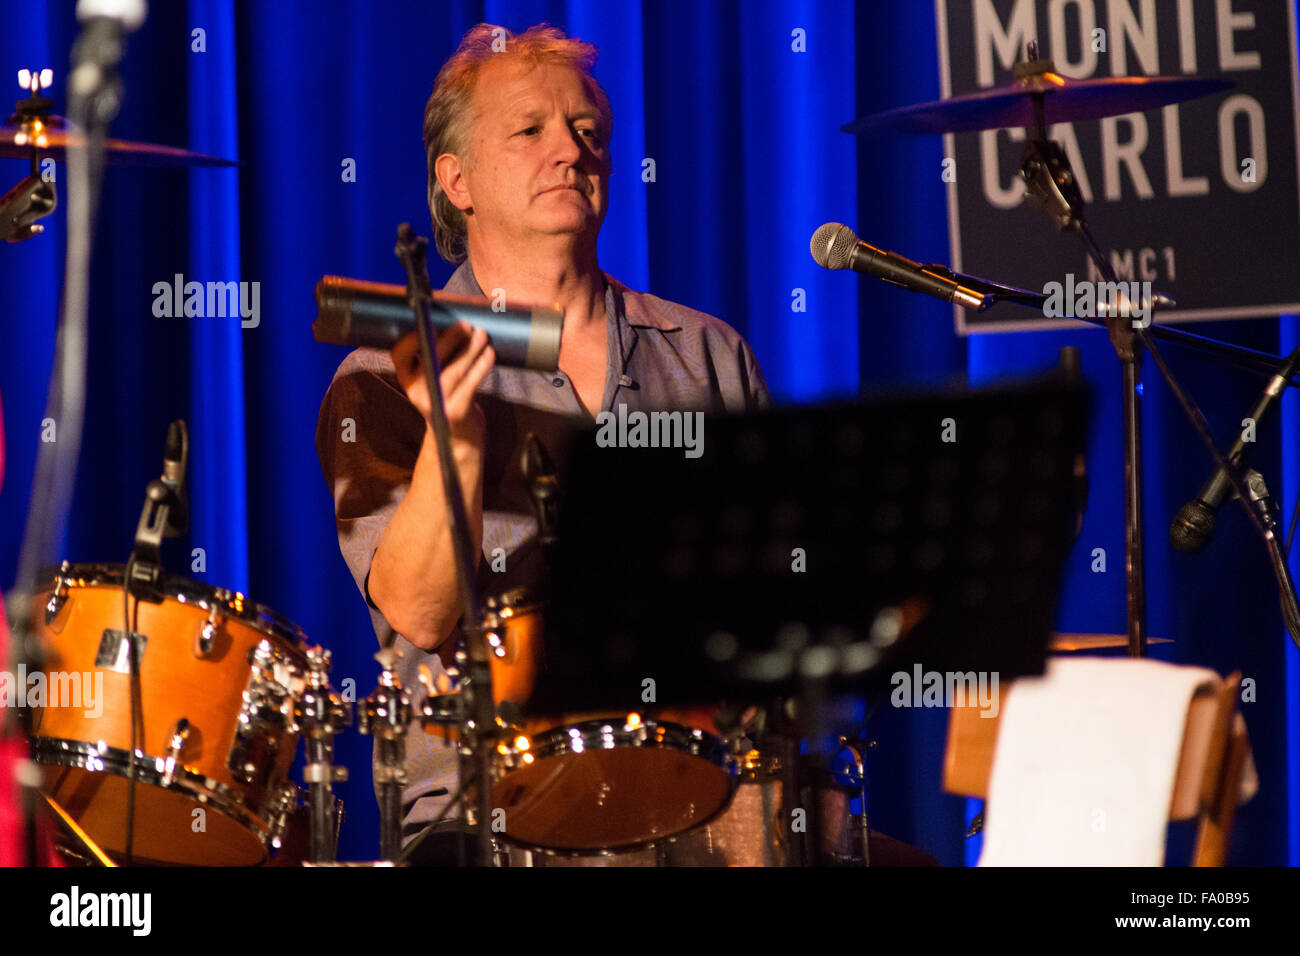 Milan Italy. 18th December 2015. The English singer and songwriter SARAH JANE MORRIS performs live on stage at Blue Note Credit:  Rodolfo Sassano/Alamy Live News Stock Photo